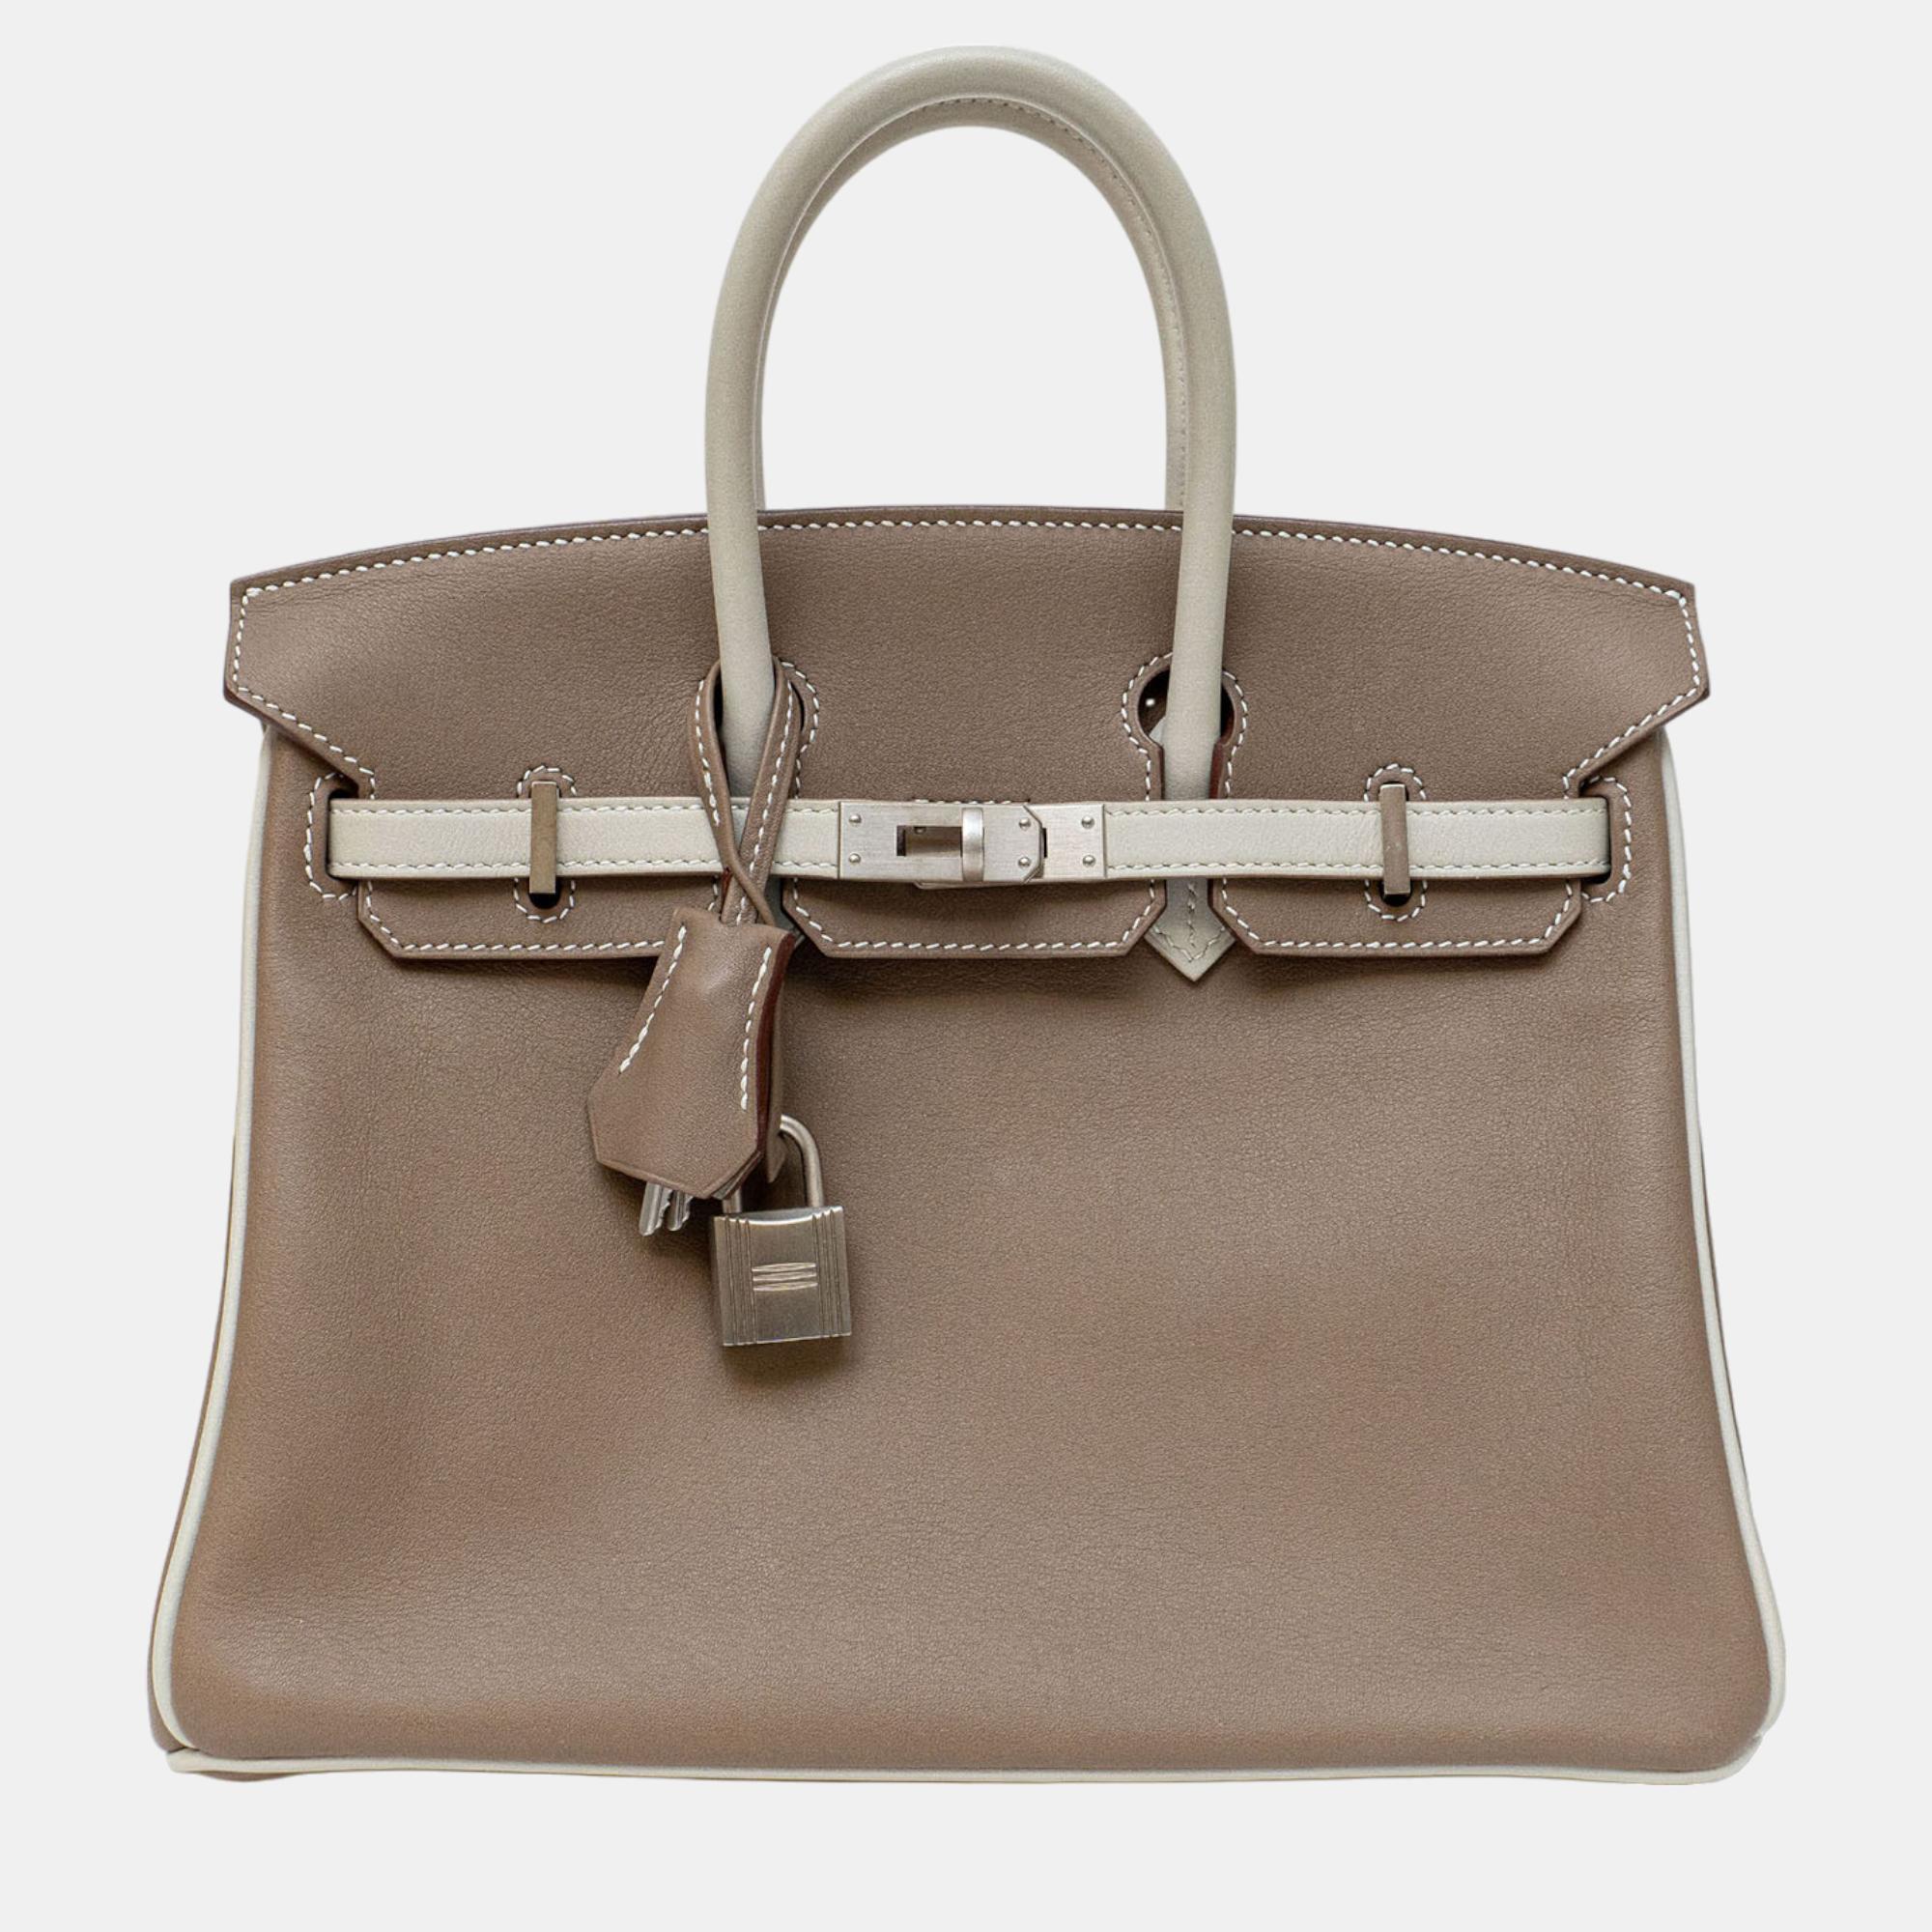 

Hermès Birkin 25 HSS in Etoupe/Gris Perle with Brushed PHW Bag, Grey